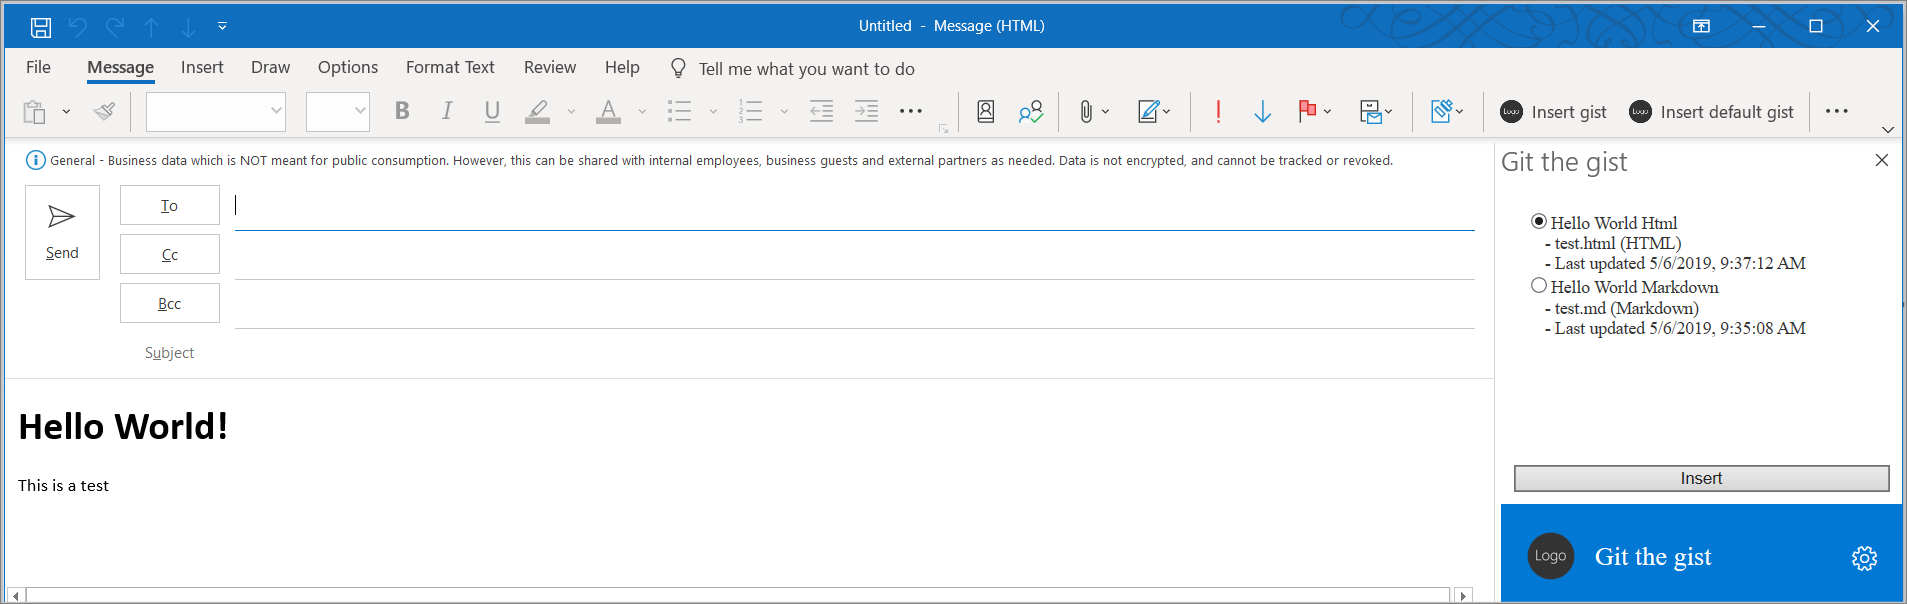 Screenshot of the message compose window and add-in task pane.